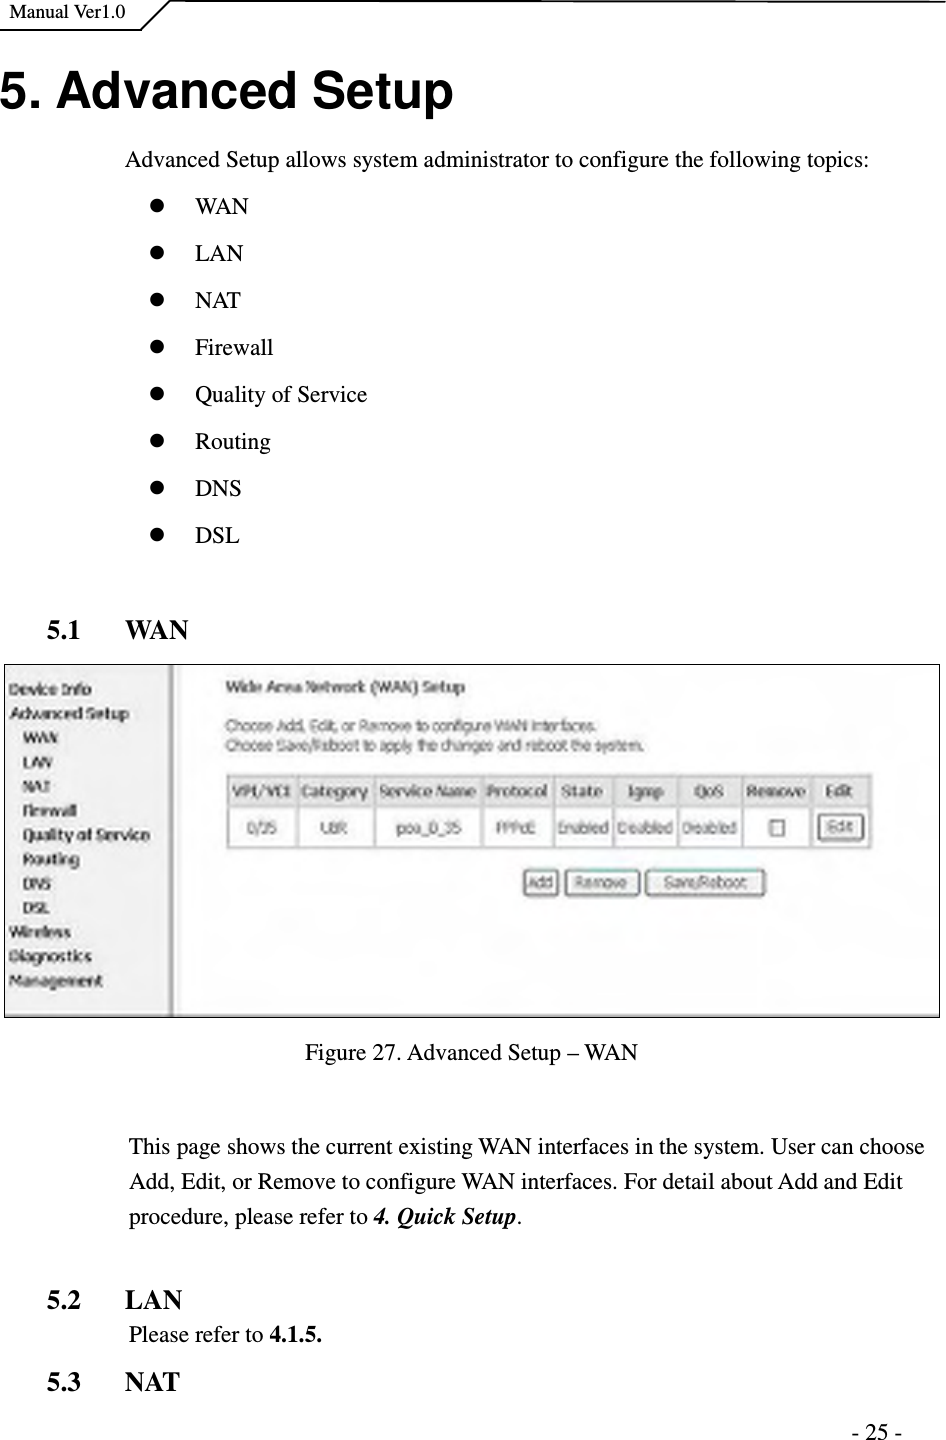    Manual Ver1.0                                                                      - 25 - 5. Advanced Setup Advanced Setup allows system administrator to configure the following topics:    WAN  LAN  NAT  Firewall  Quality of Service  Routing  DNS  DSL  5.1 WAN   Figure 27. Advanced Setup – WAN    This page shows the current existing WAN interfaces in the system. User can choose Add, Edit, or Remove to configure WAN interfaces. For detail about Add and Edit procedure, please refer to 4. Quick Setup.    5.2 LAN   Please refer to 4.1.5. 5.3 NAT 